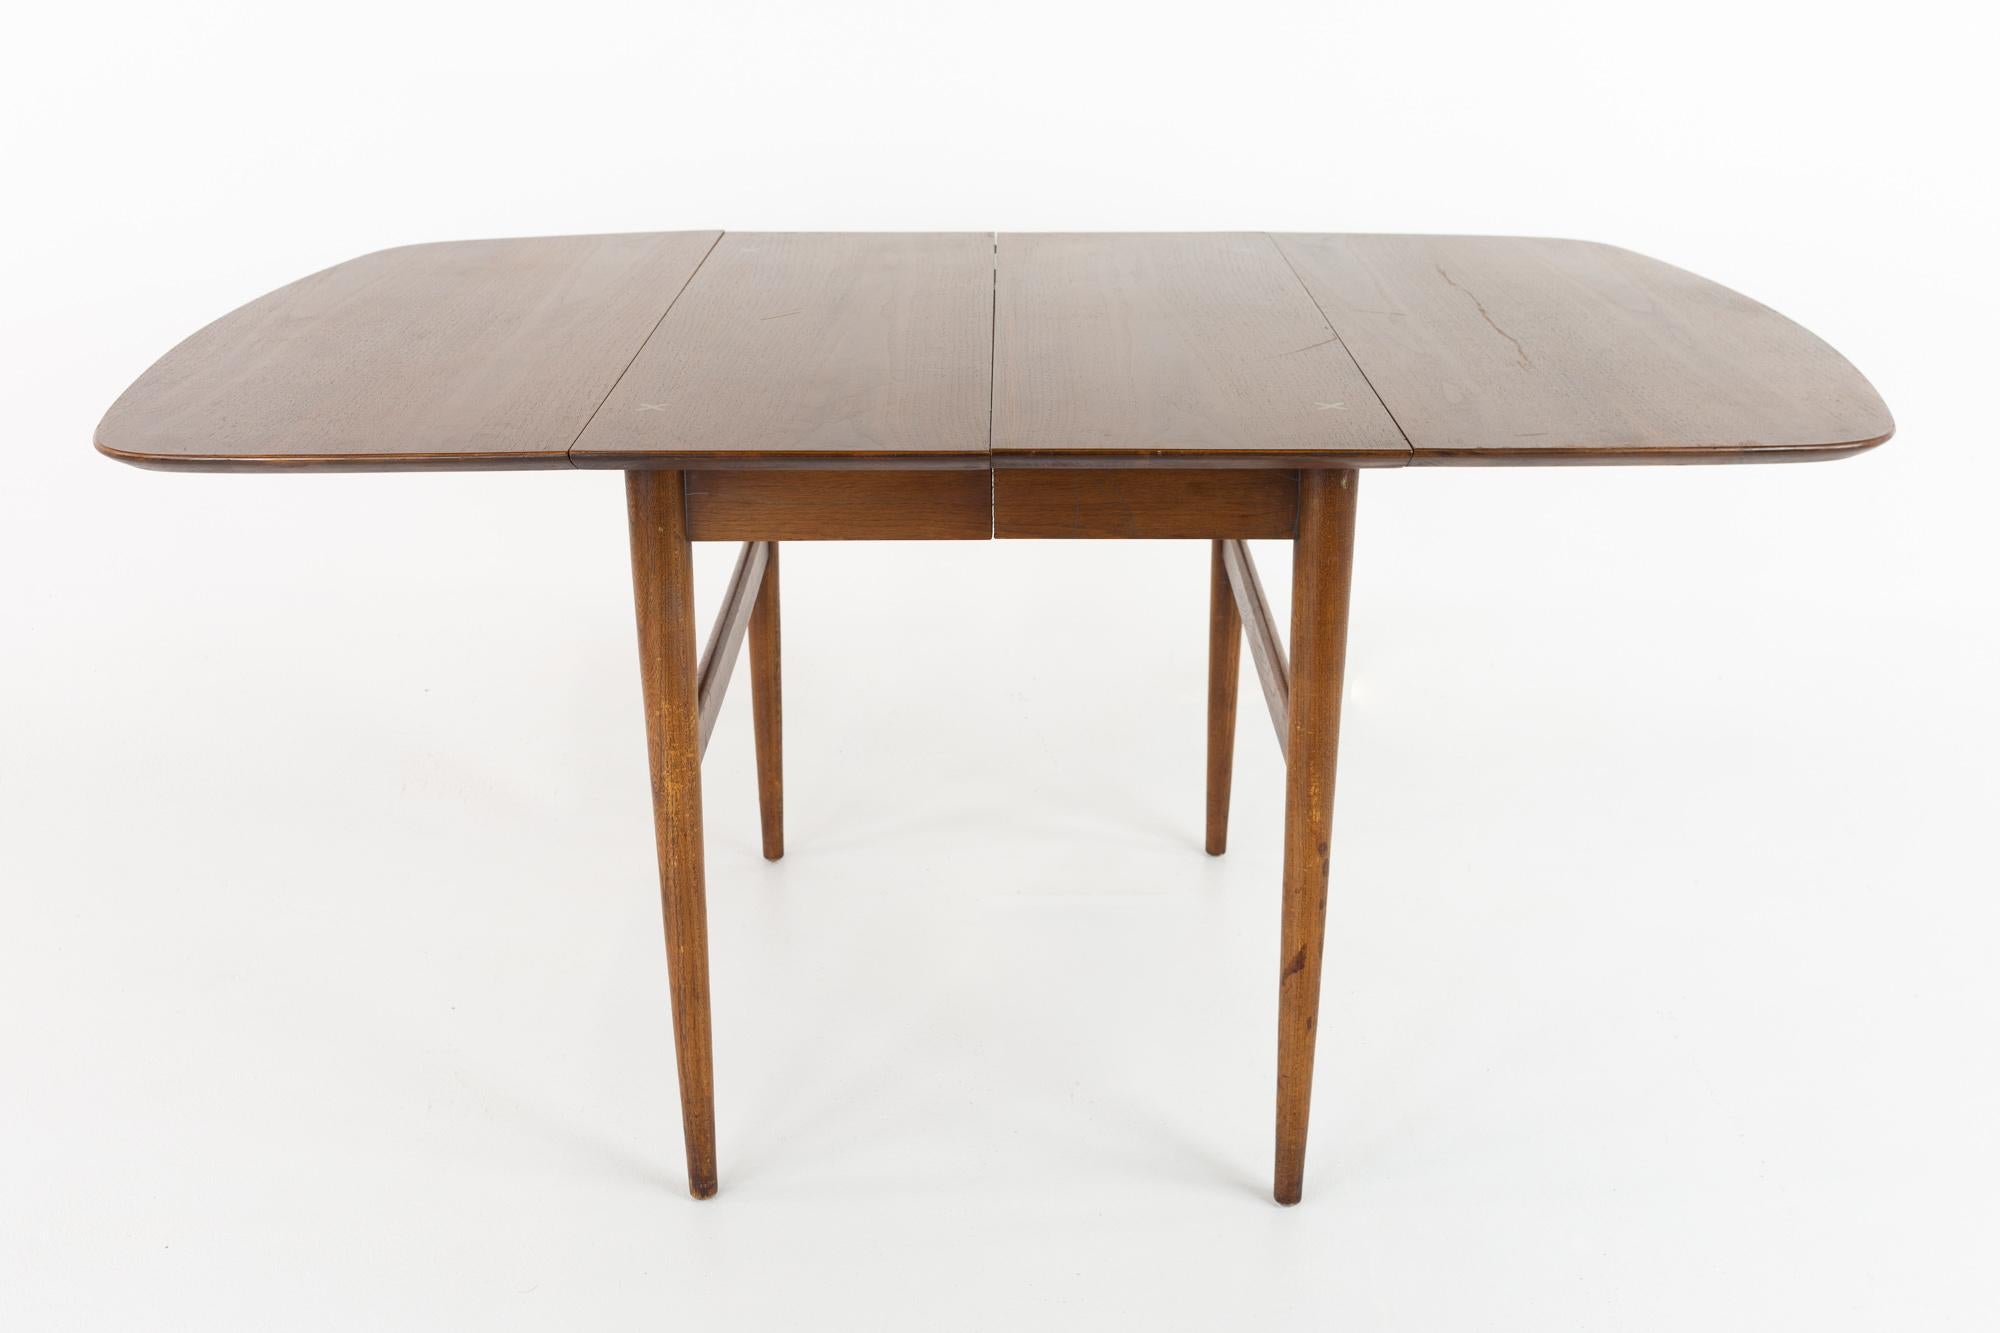 Late 20th Century Merton Gershun for American of Marinsville Mid Century Dining Table with 2 Leave